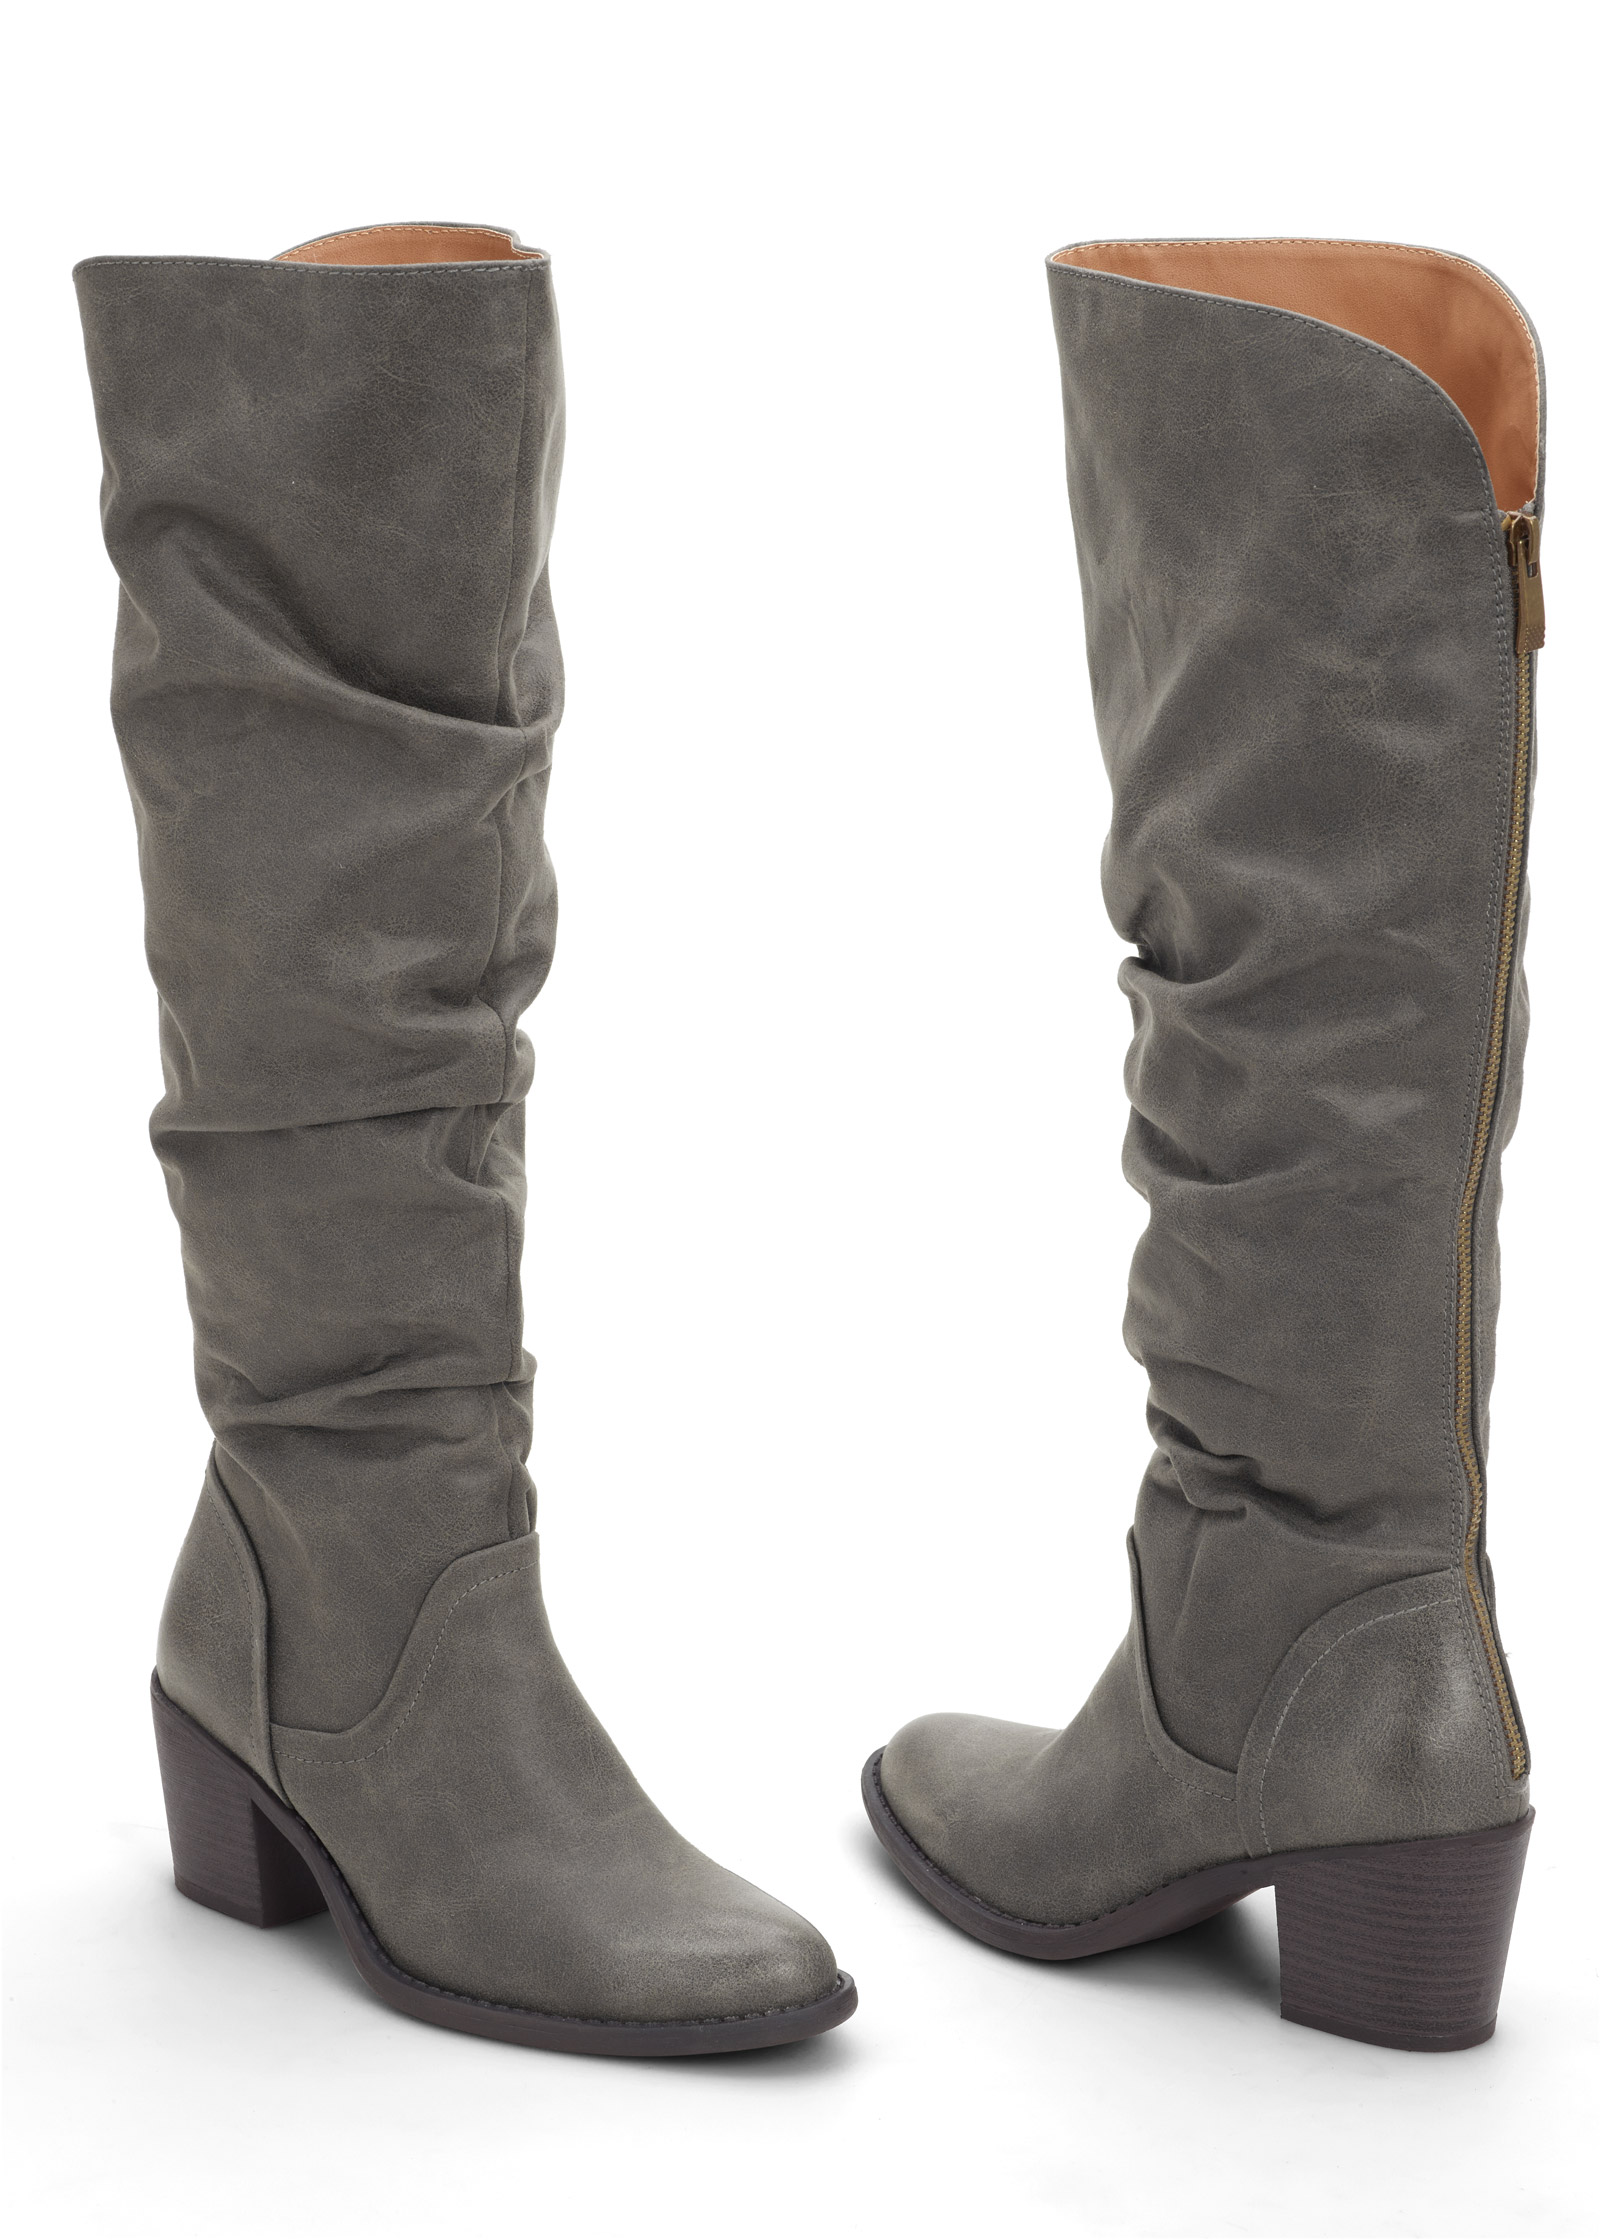 slouchy mid calf boots